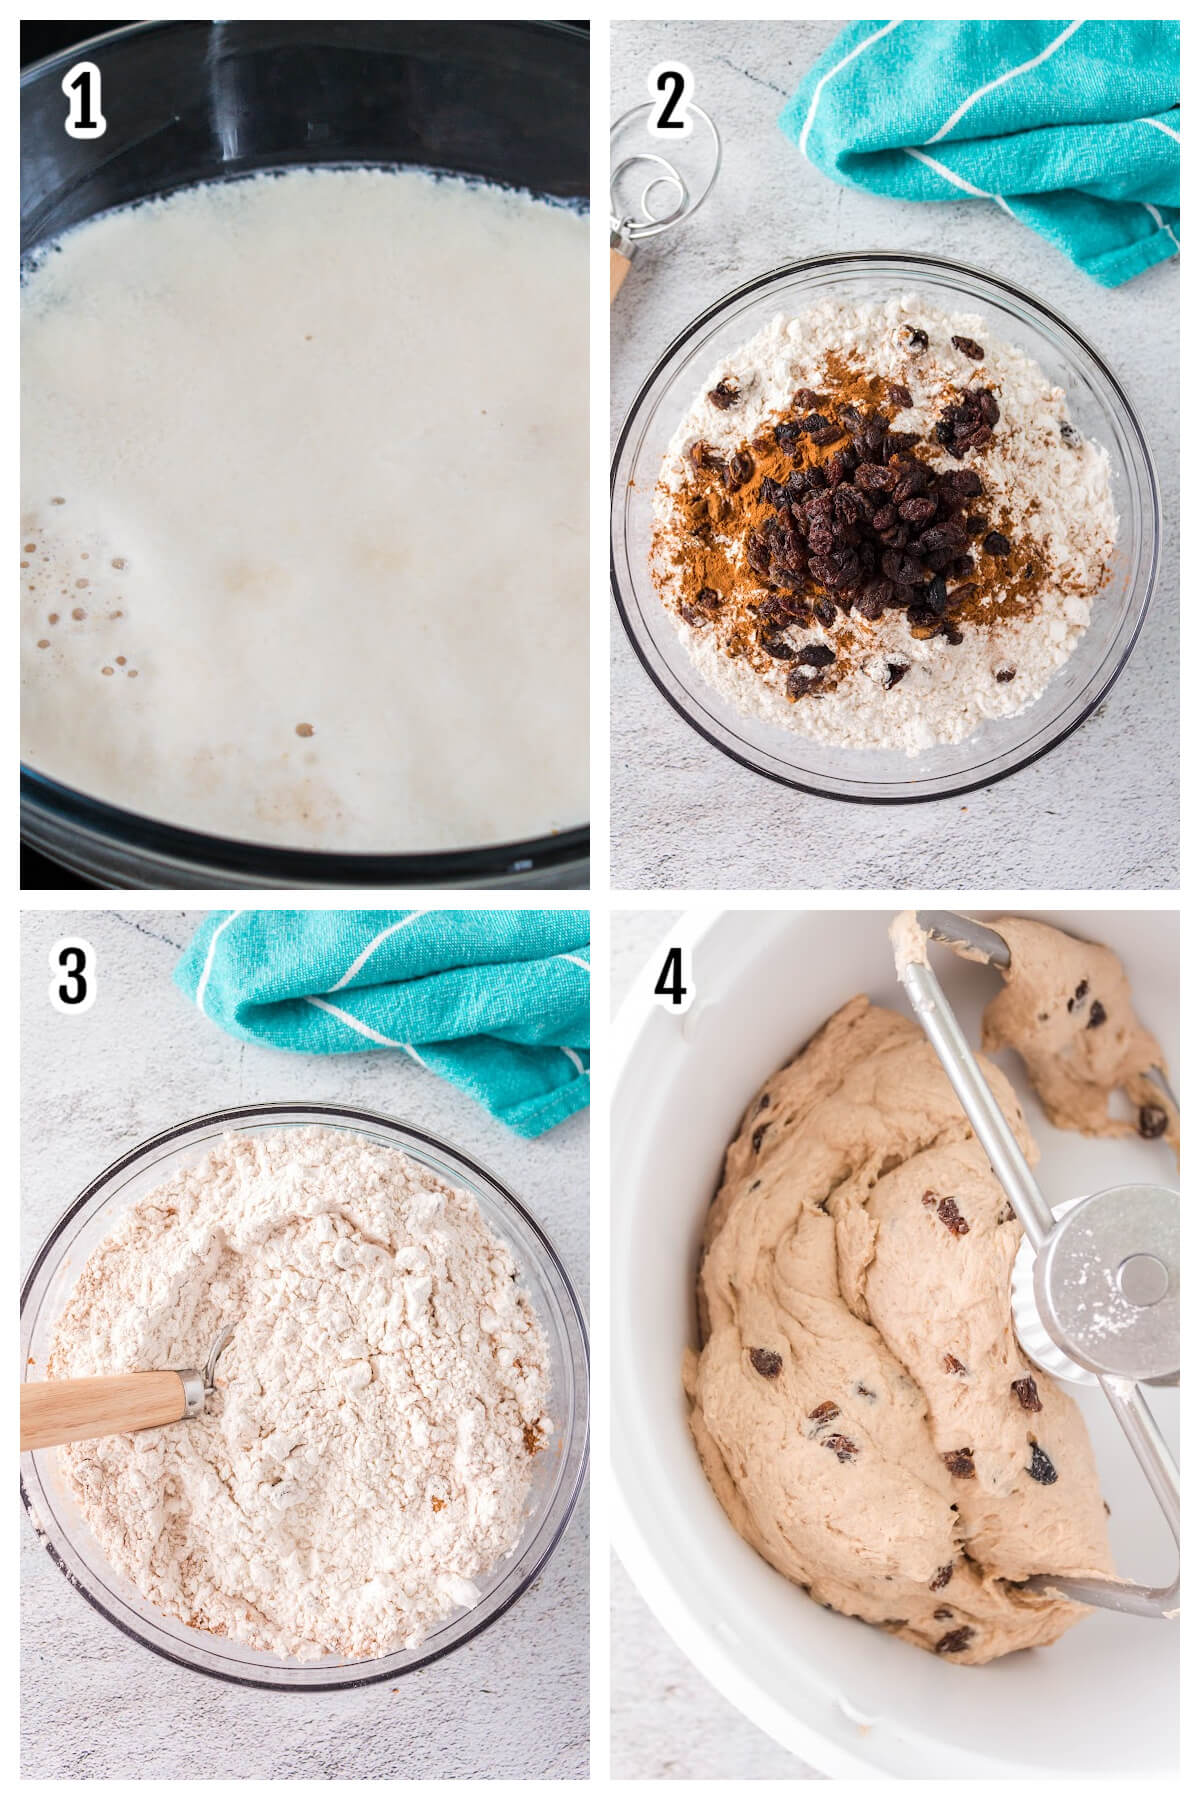 First four steps in making the homemade Cinnamon Raisin bread.